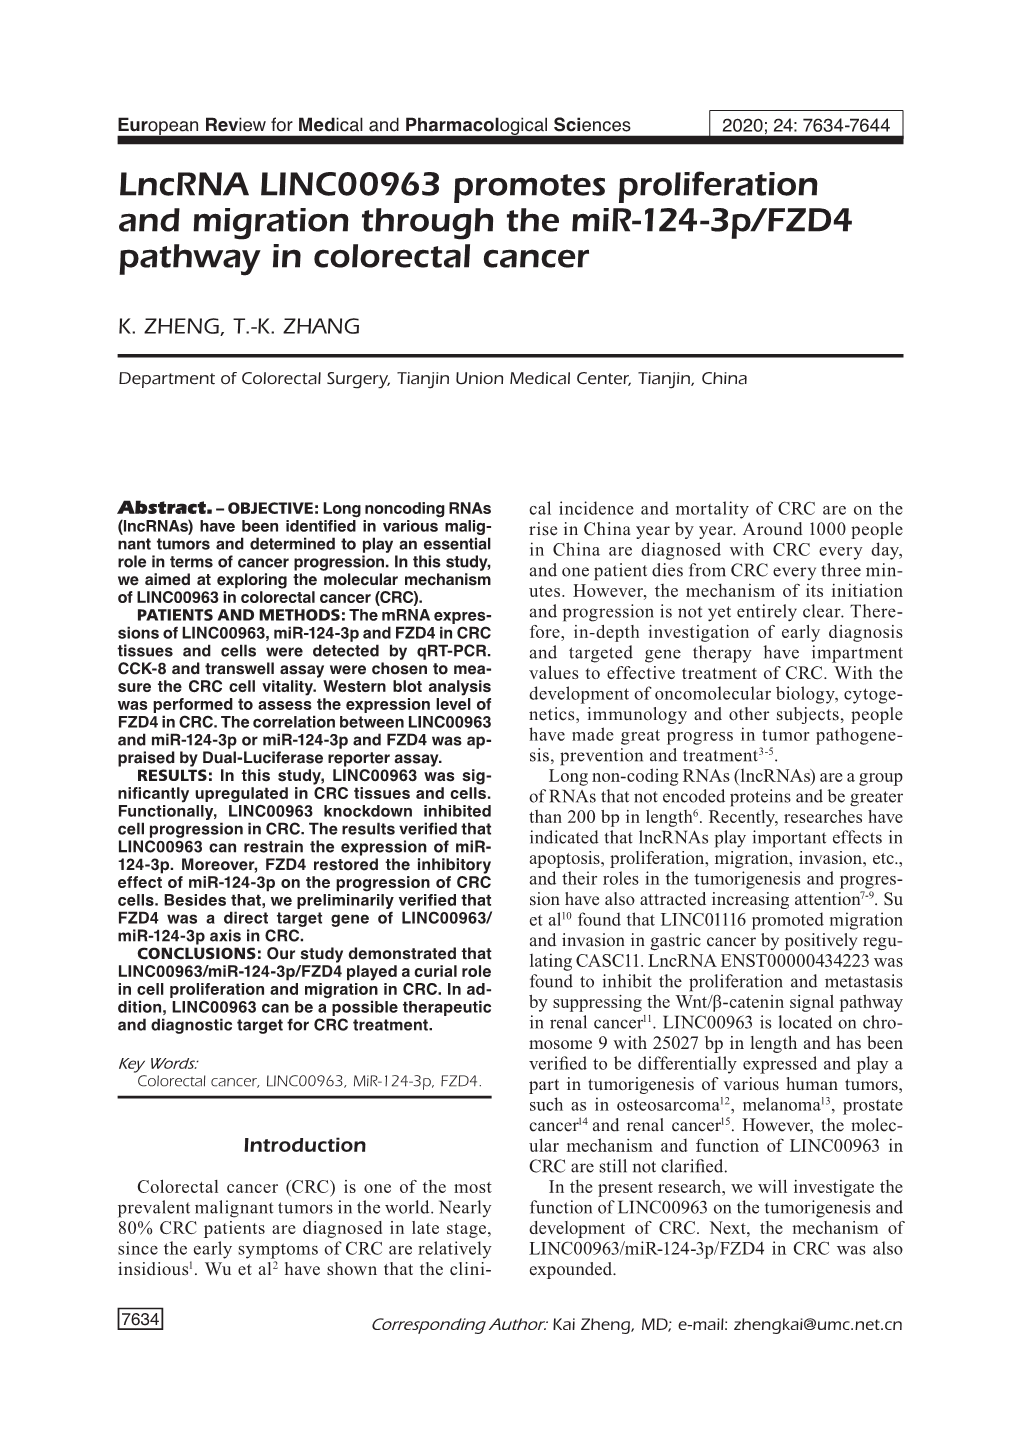 Lncrna LINC00963 Promotes Proliferation and Migration Through the Mir-124-3P/FZD4 Pathway in Colorectal Cancer